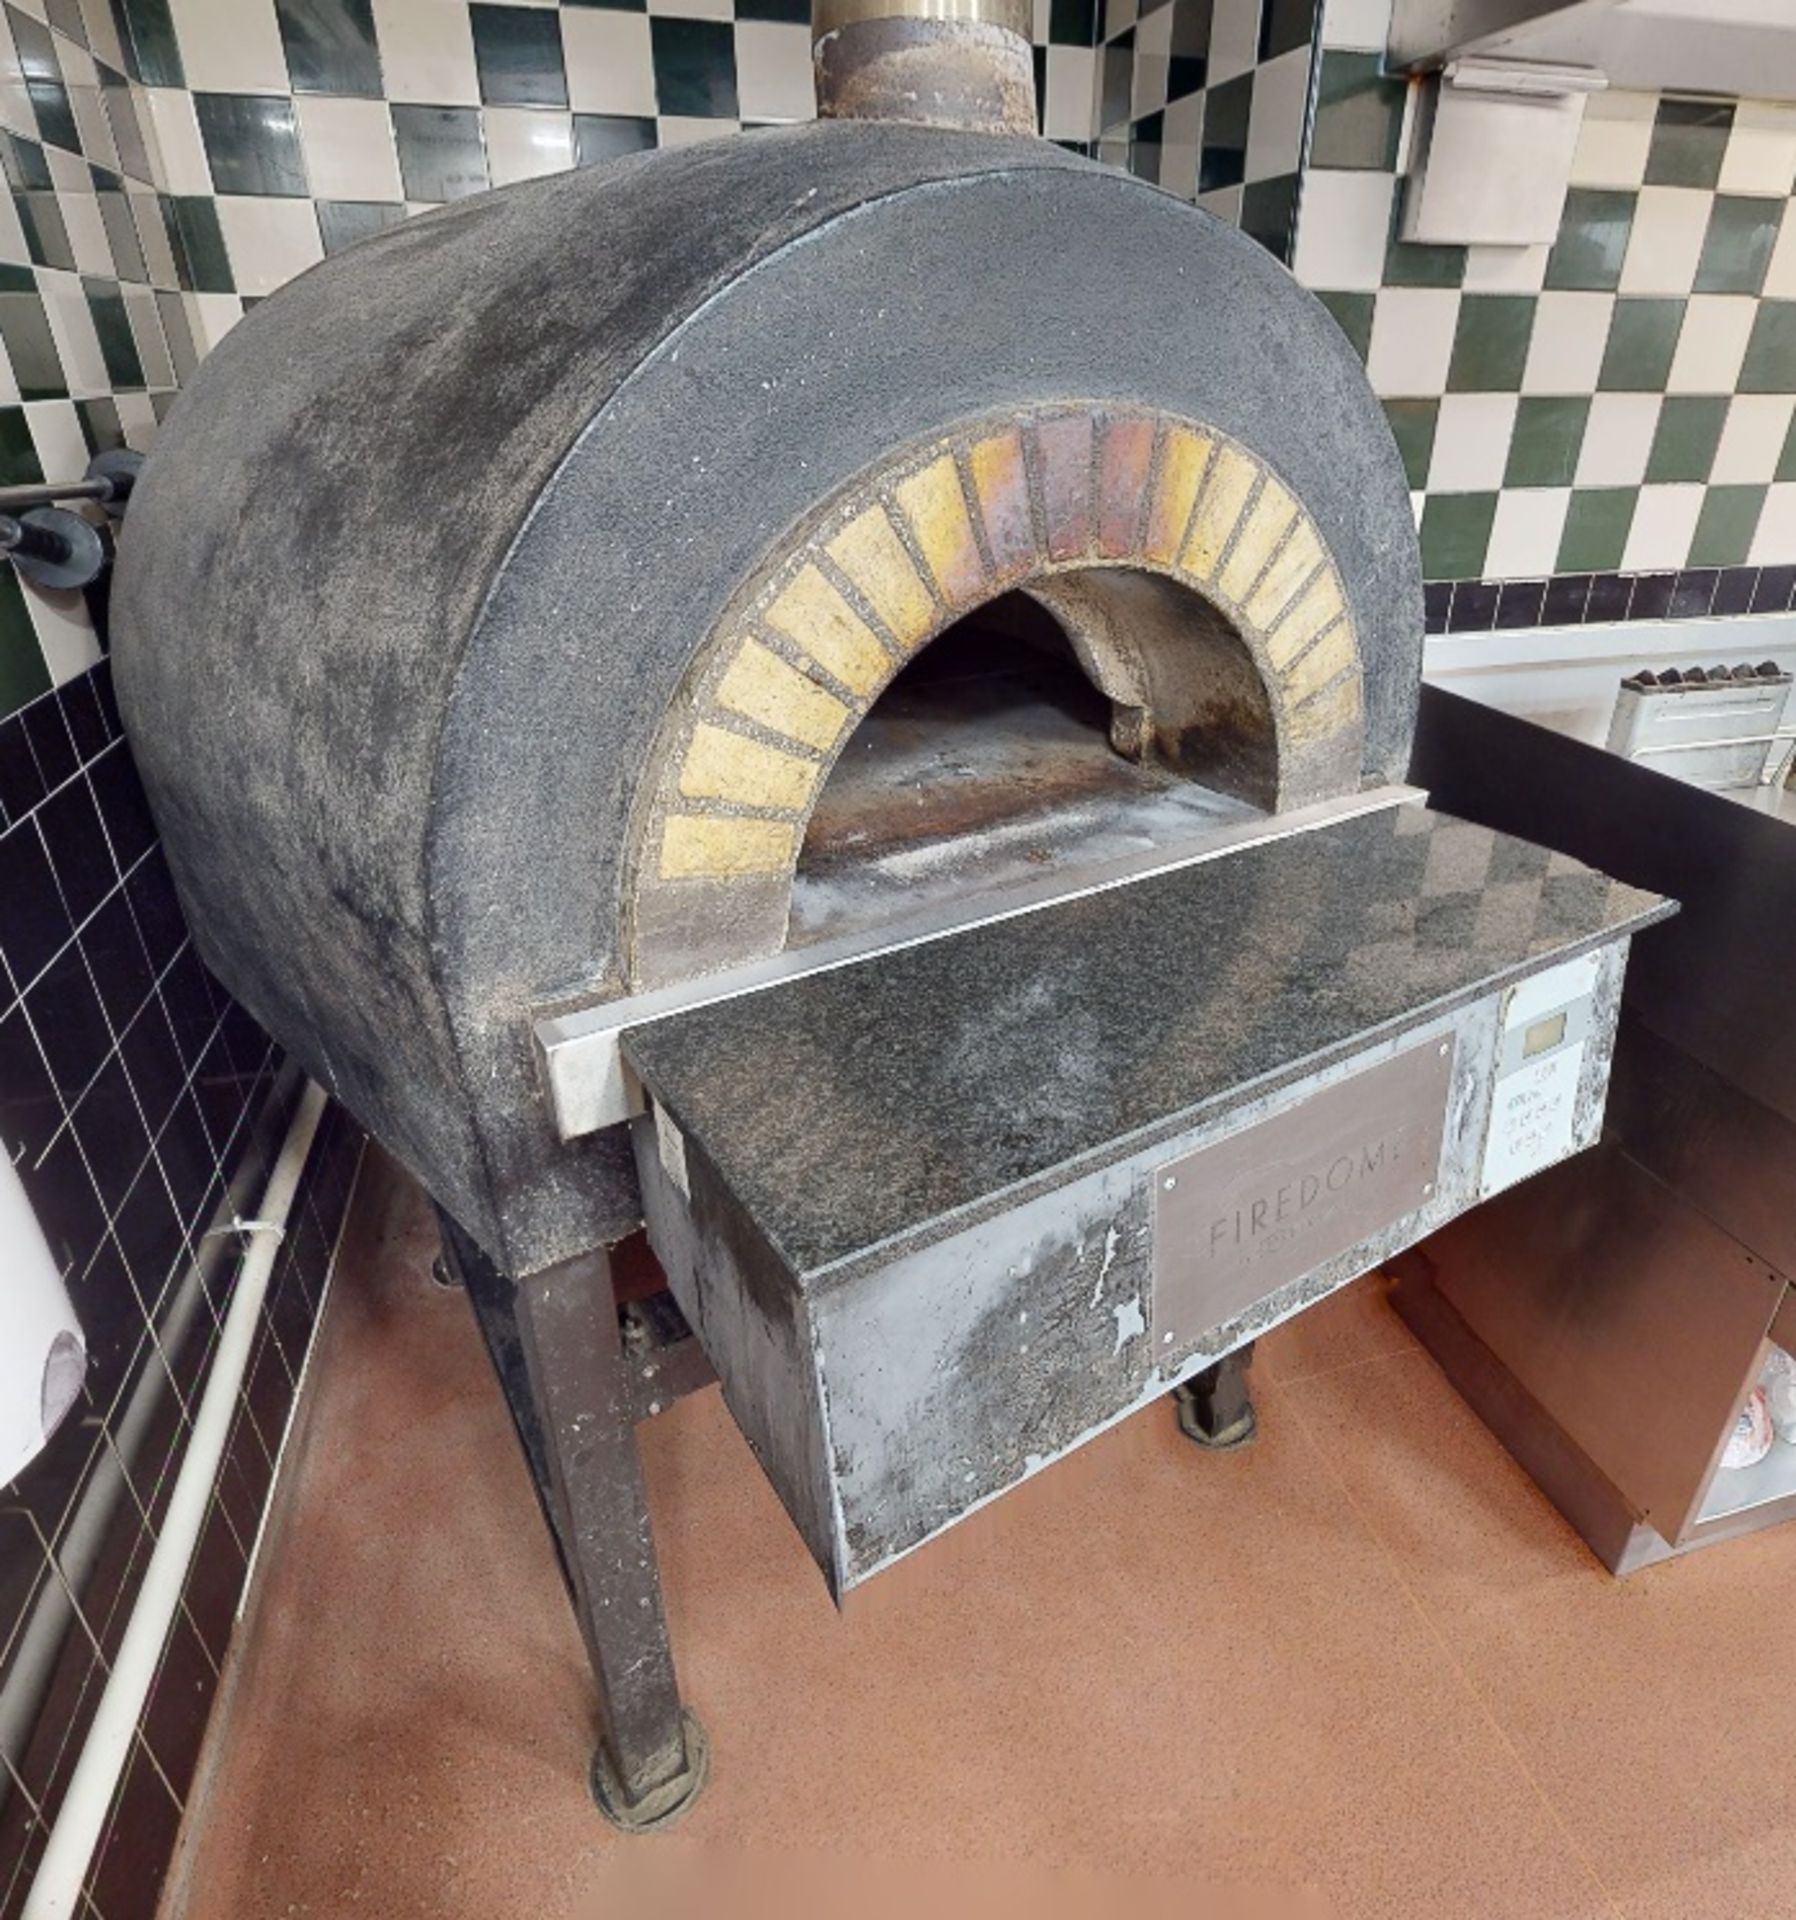 1 x MAM Firedome Commercial Stone Baked Gas Pizza Oven - Made in Italy - Type Modular Fire E - - Image 2 of 8